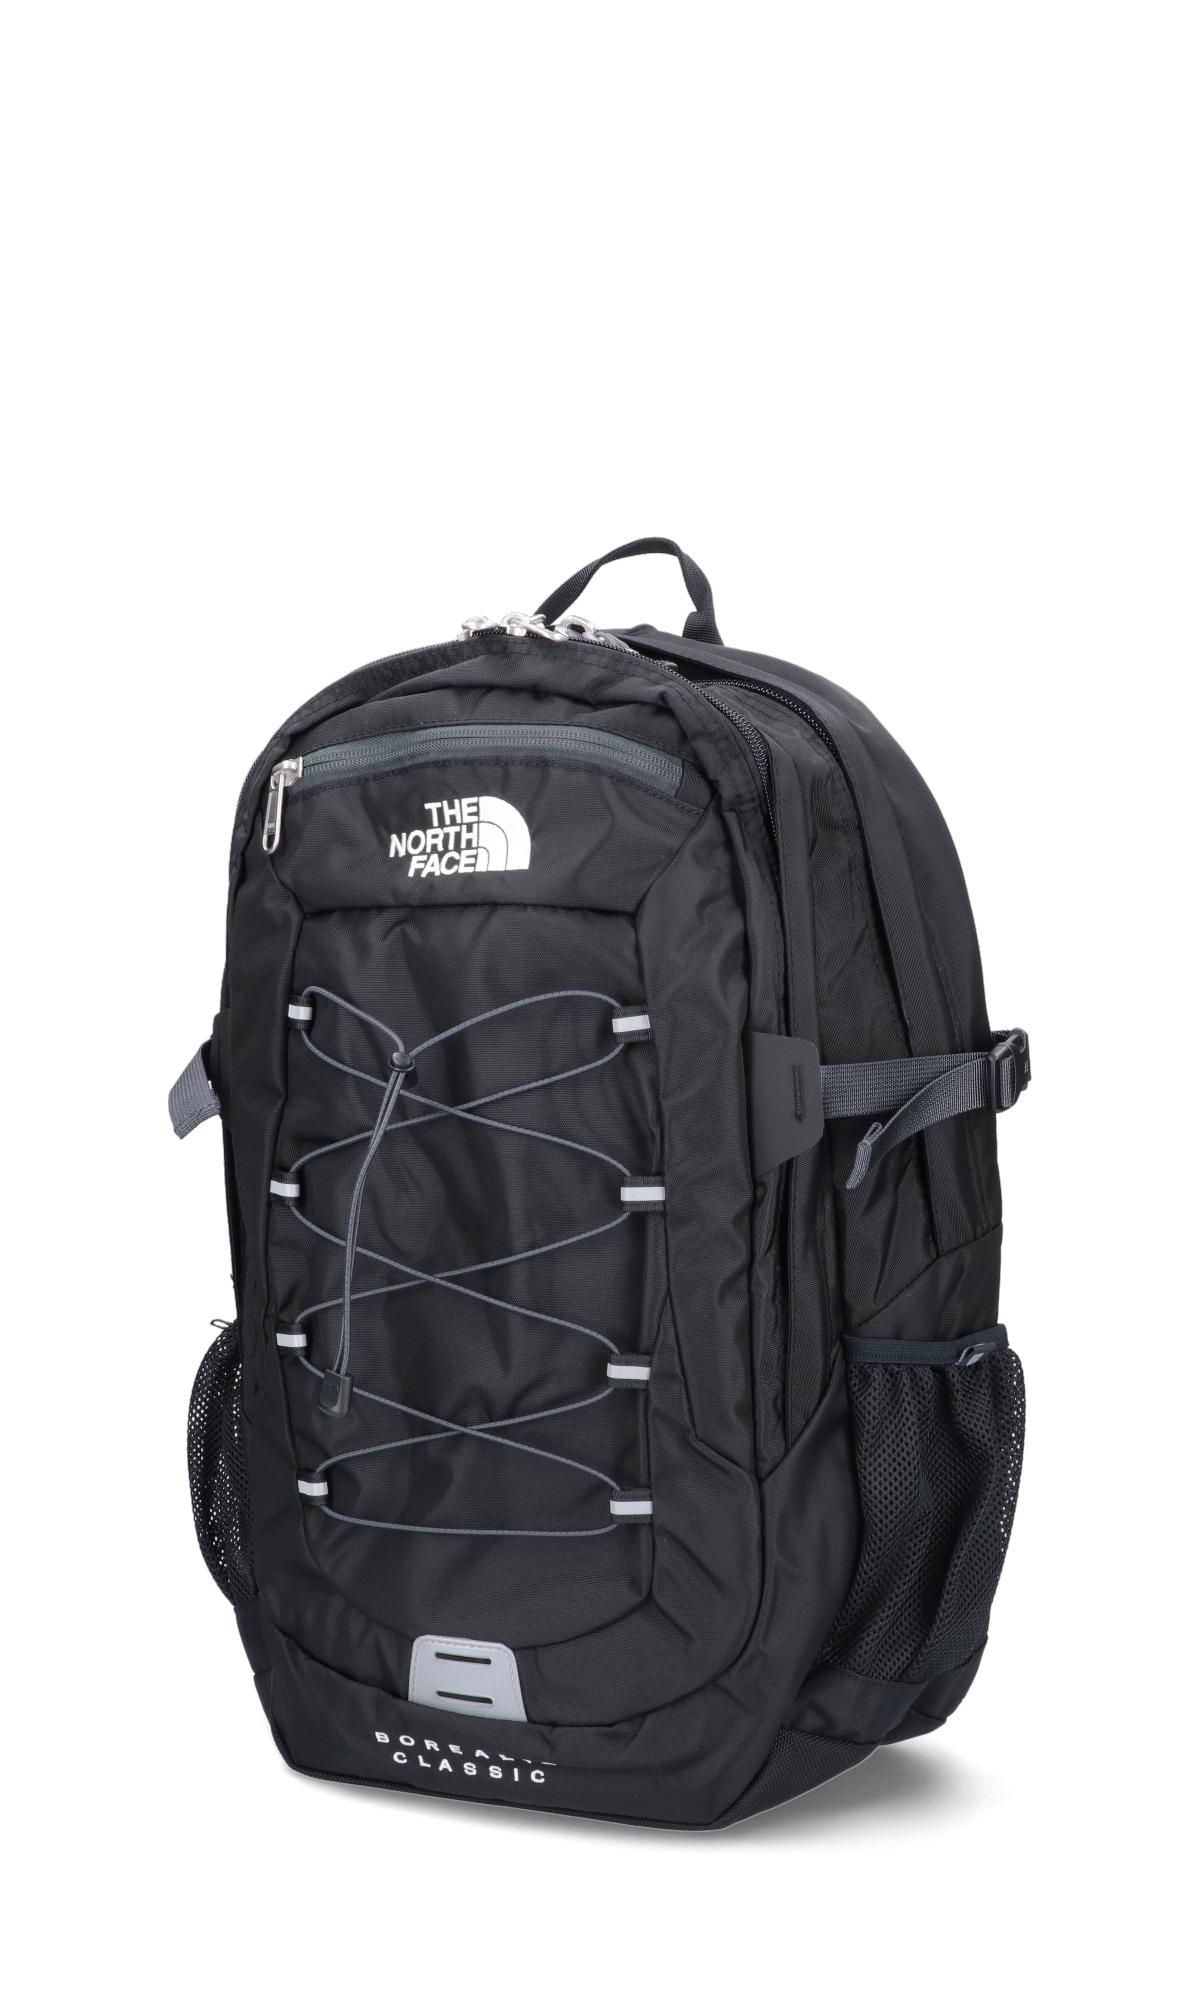 North Face Borealis Classic Backpack Black Online Offer, 50% OFF |  thebighousegroup.com